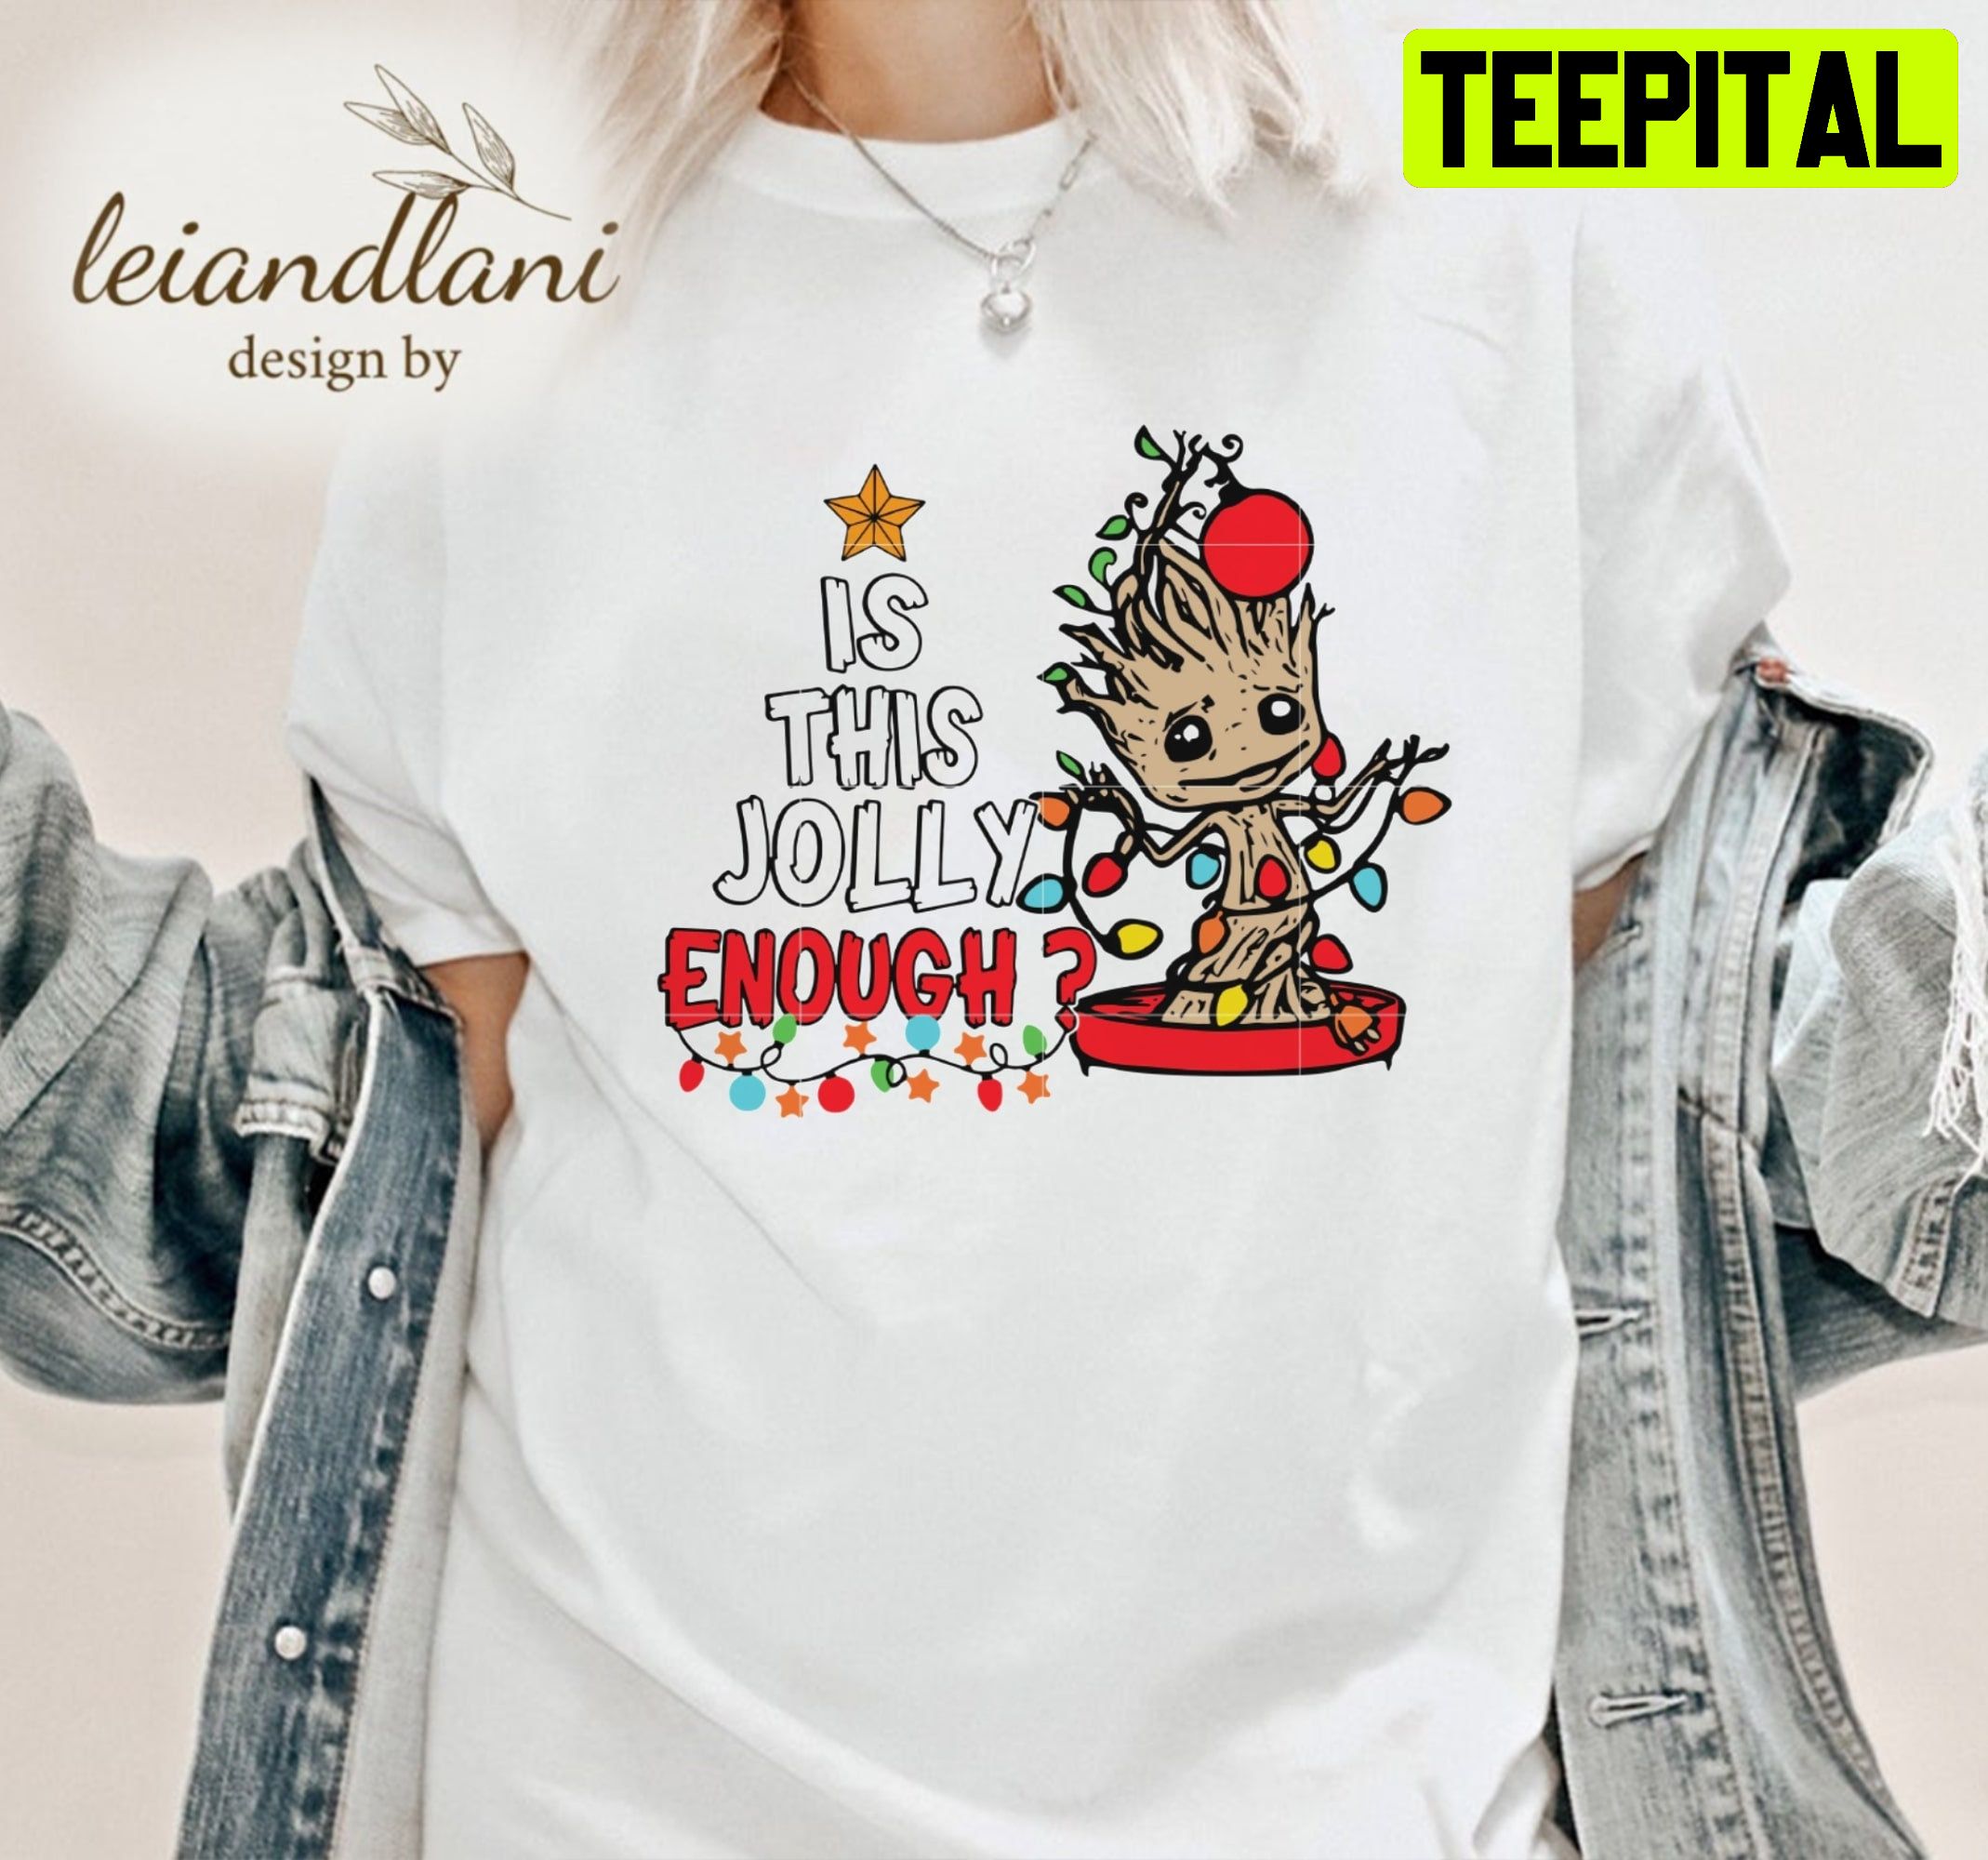 https://teepital.com/wp-content/uploads/2022/10/groot-is-this-jolly-enough-marvel-baby-groot-guardians-of-the-galaxy-christmas-unisesx-tshirt4et3h.jpg